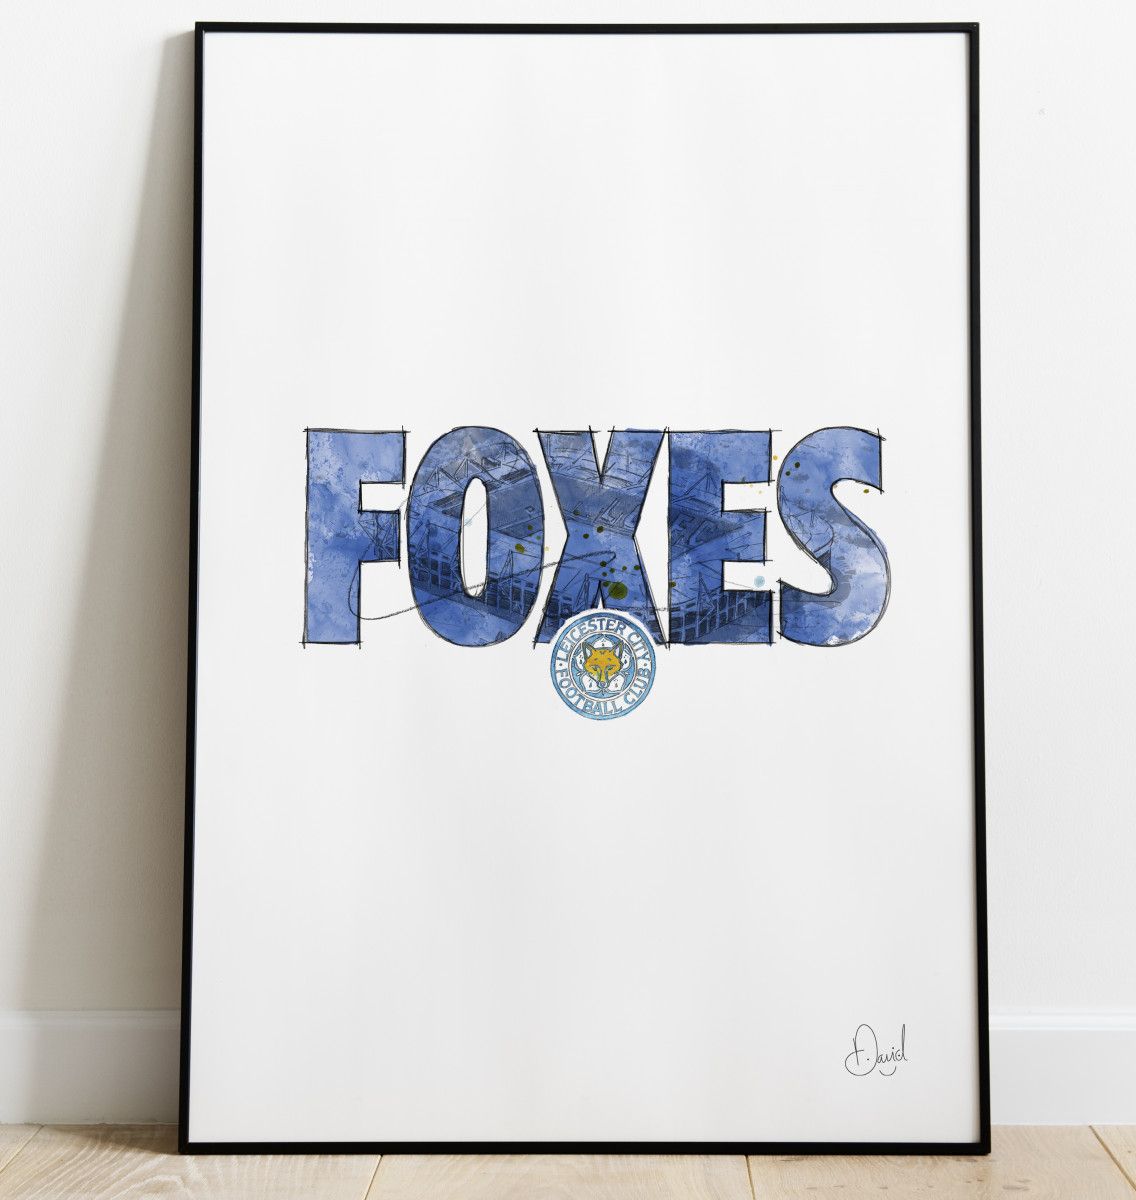 Leicester City - Foxes art print